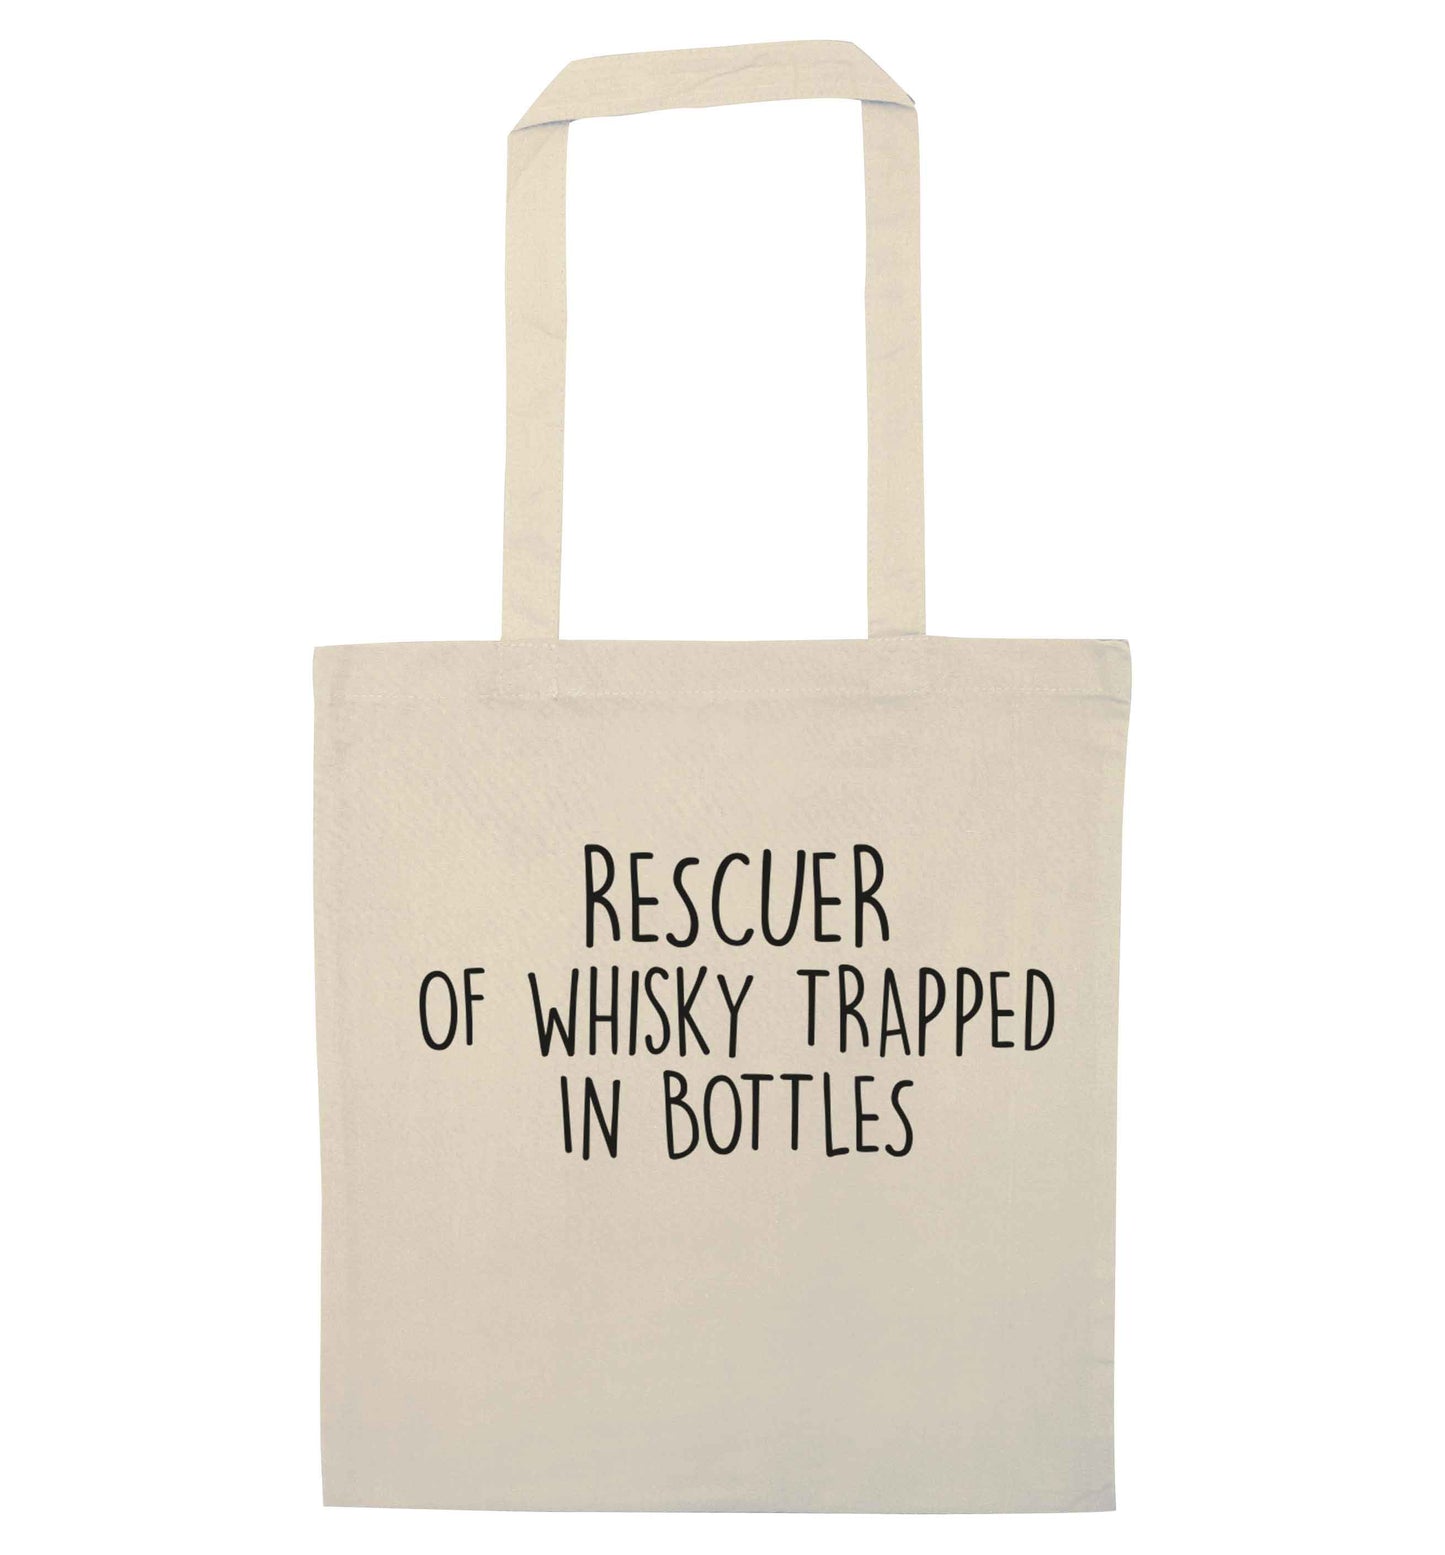 Rescuer of whisky trapped in bottles natural tote bag